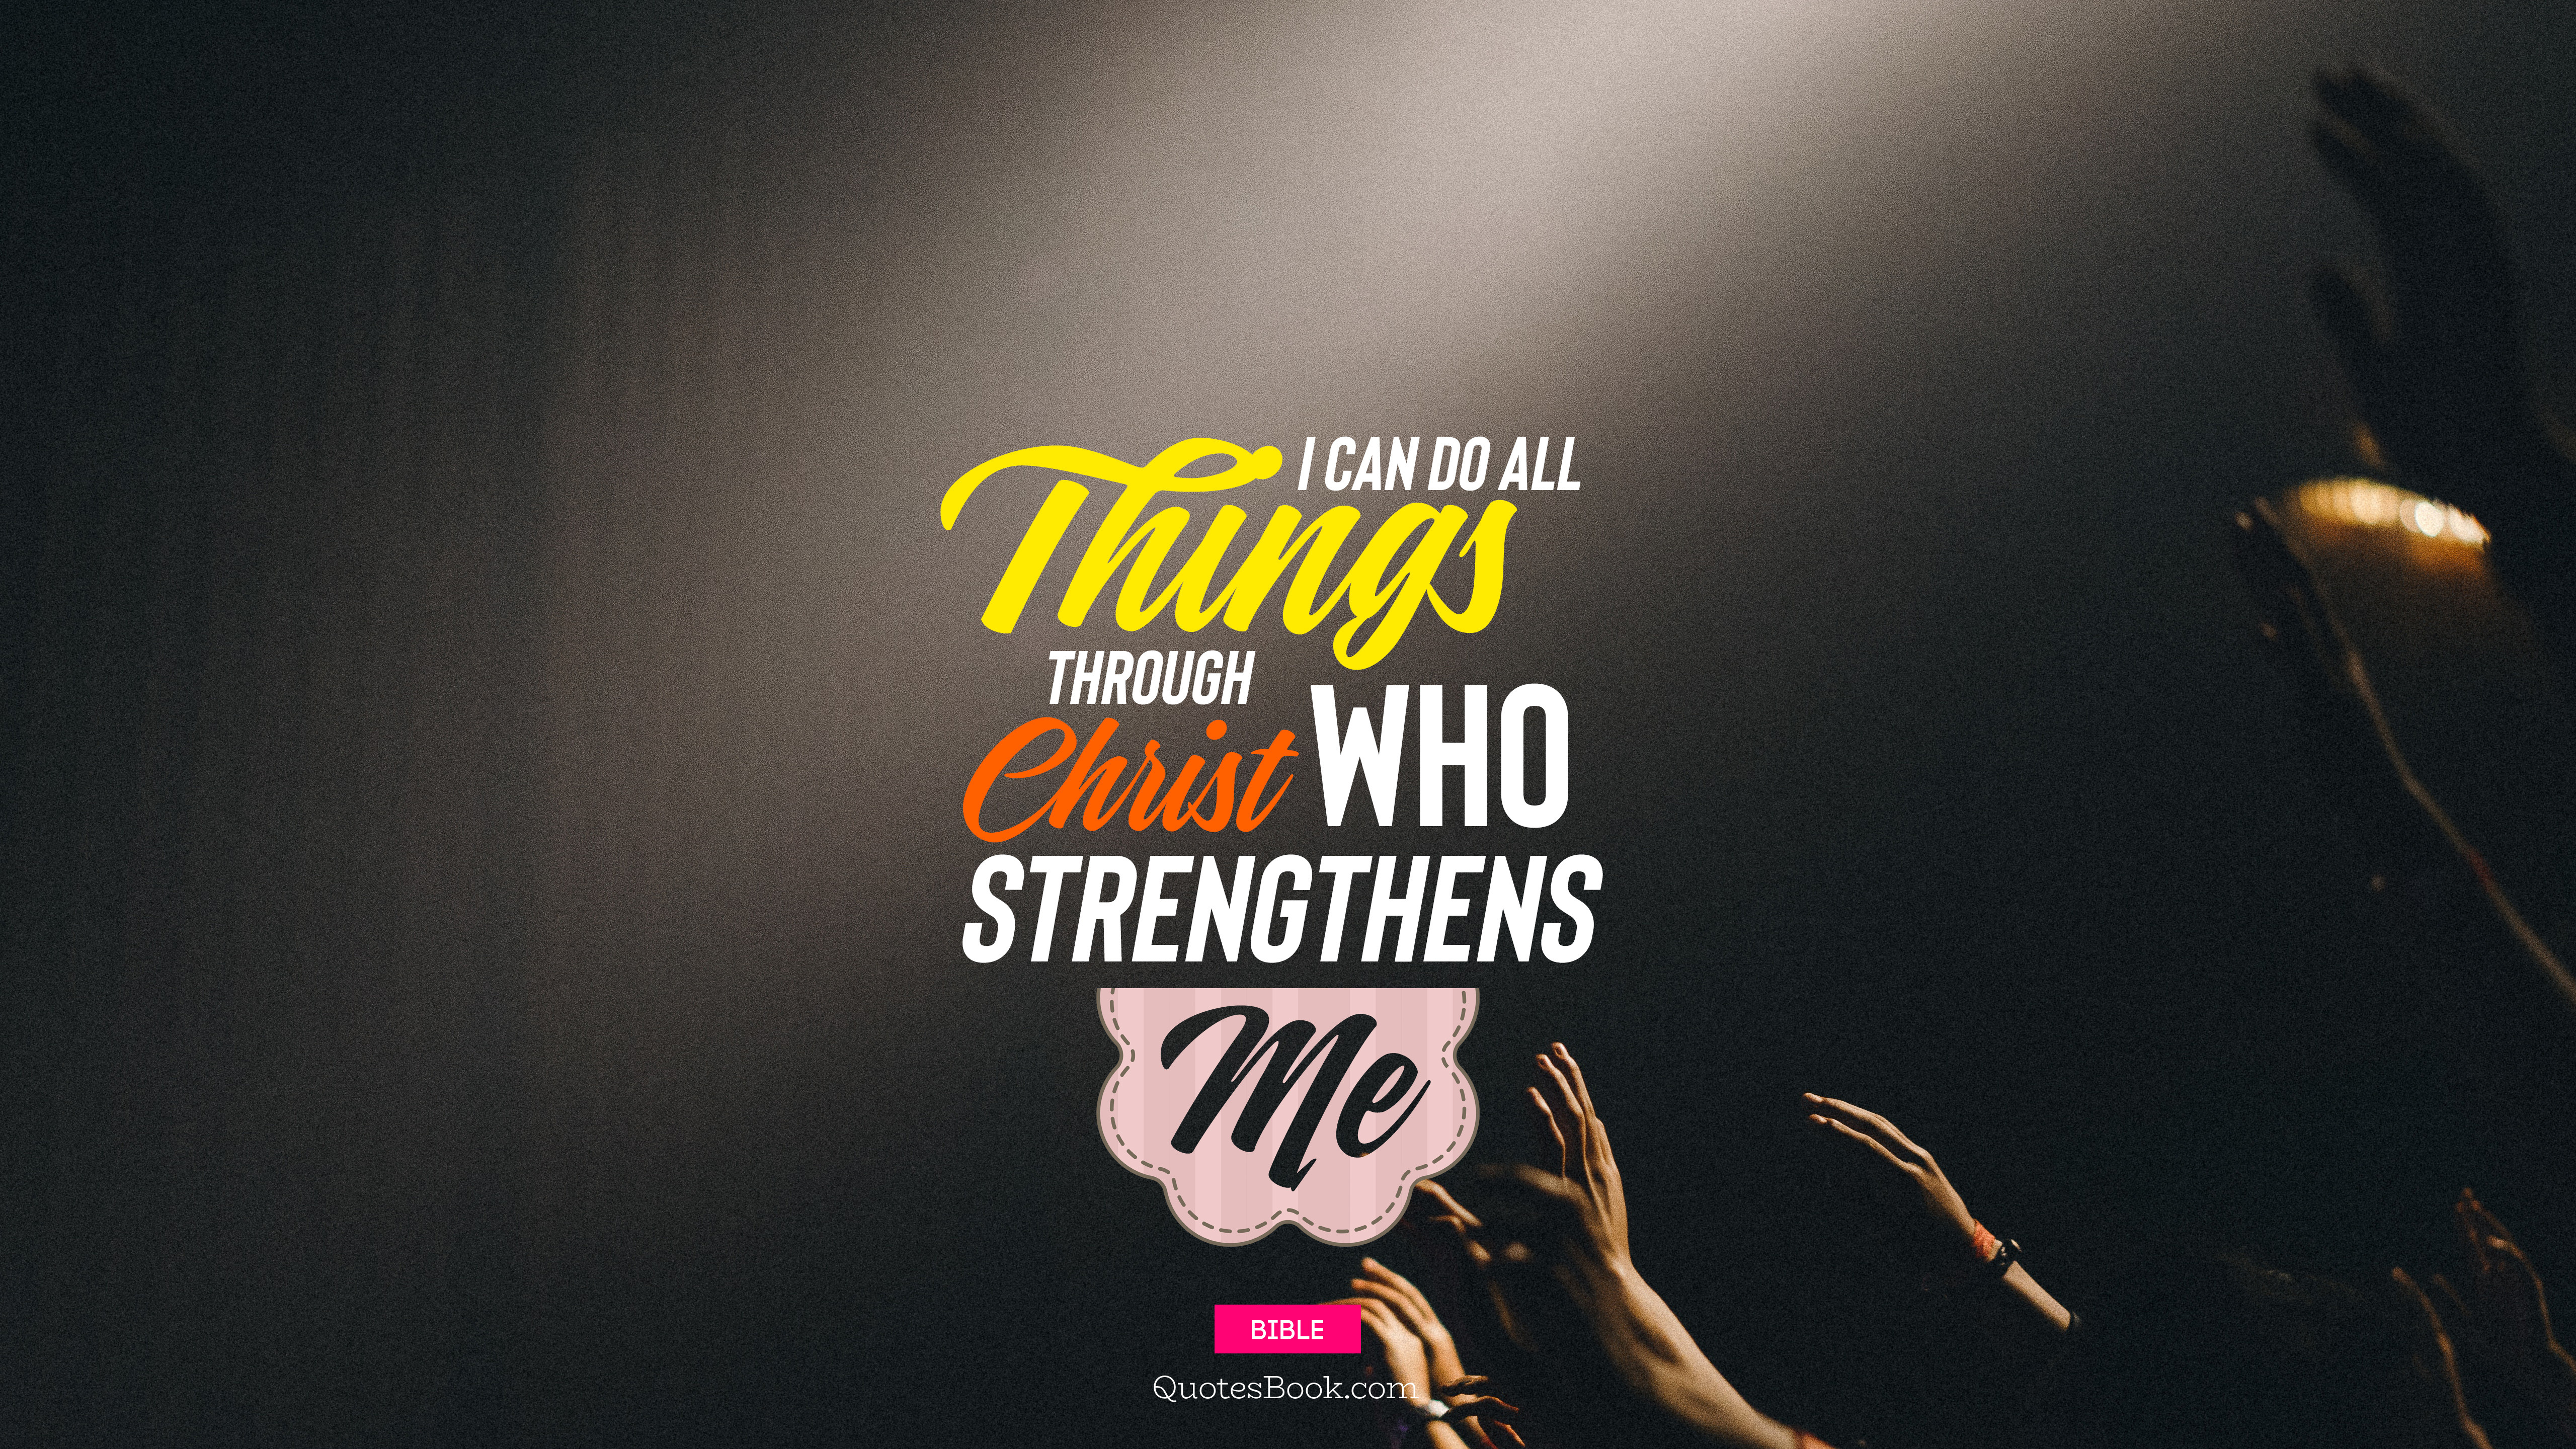 I can do all things through christ who strengthens me - QuotesBook